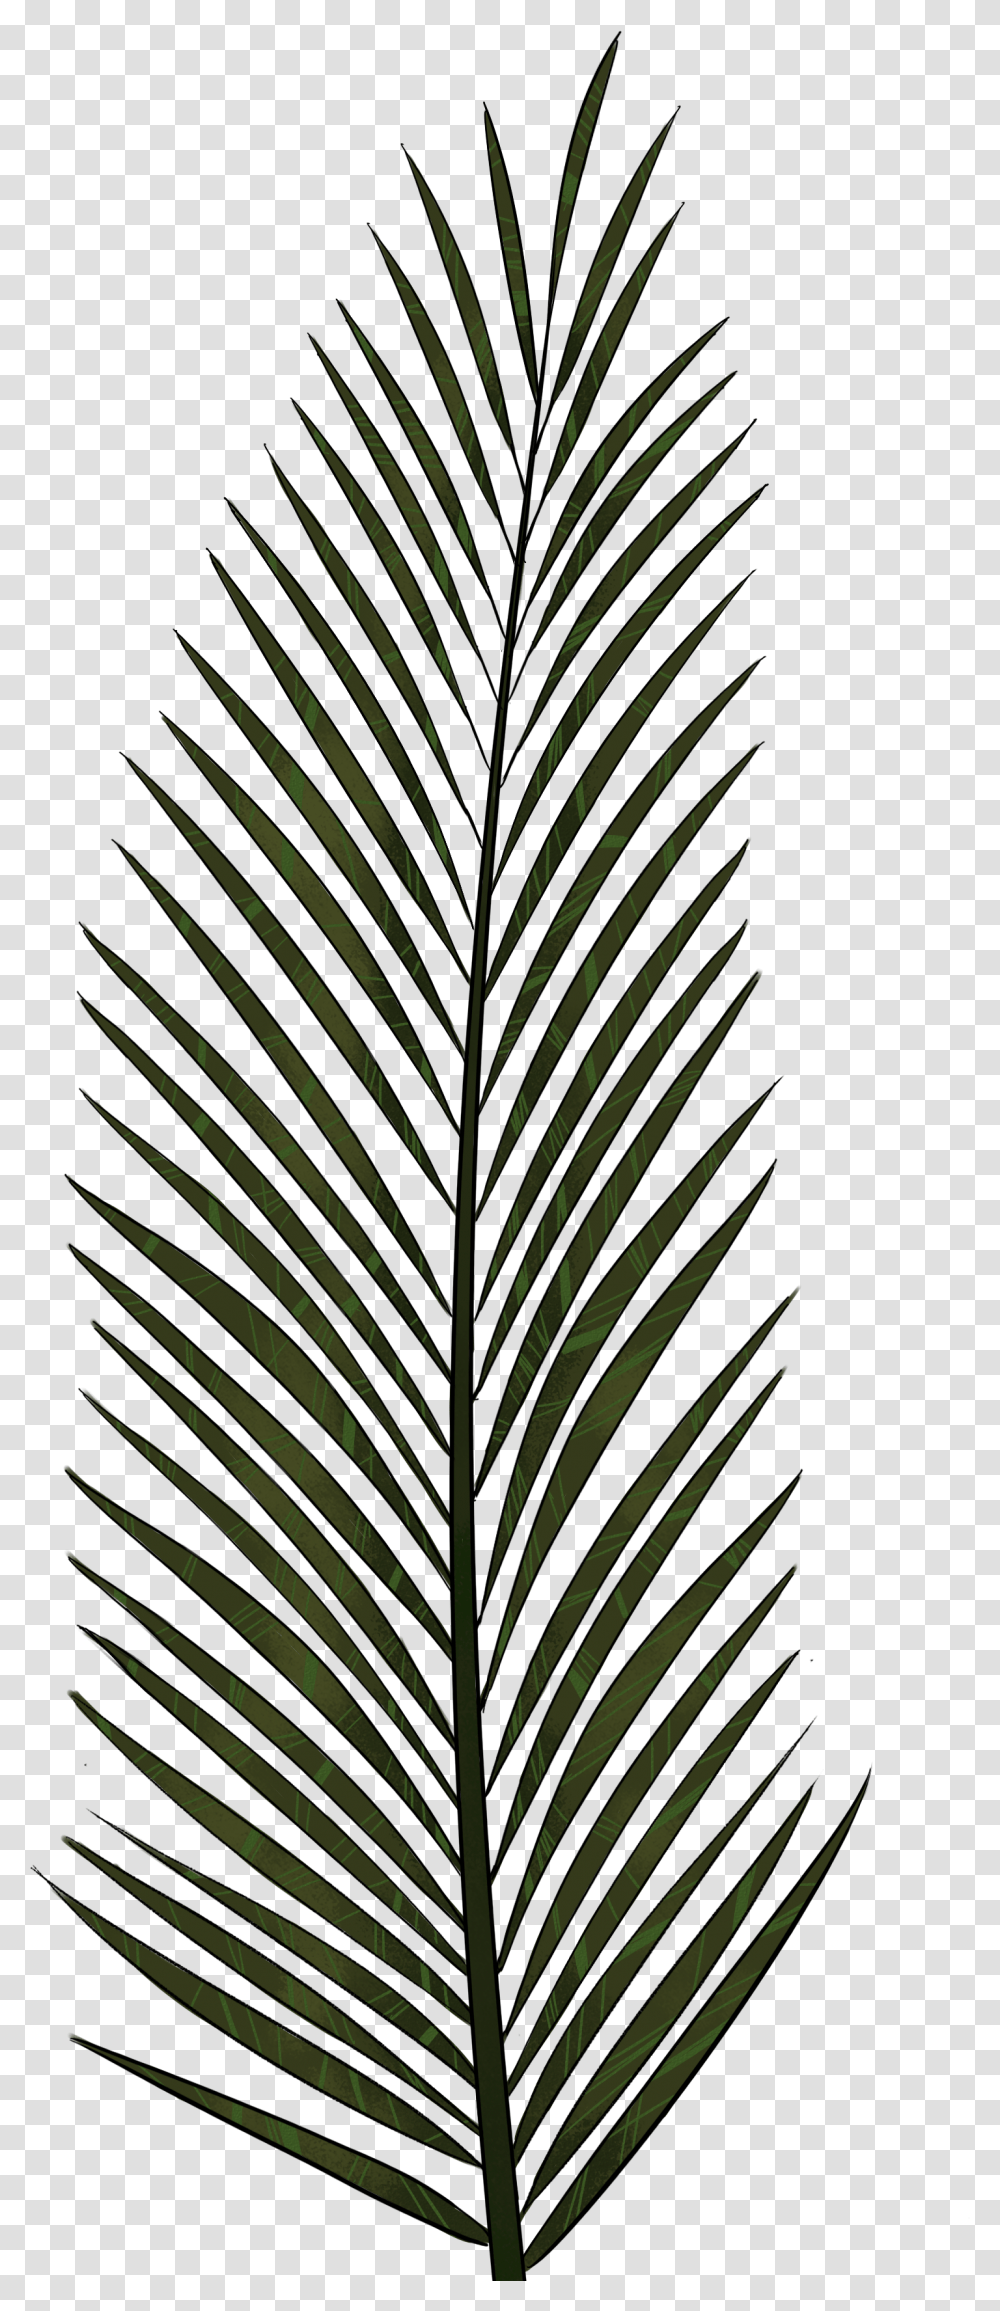 Cliparts For Free Download Palm Clipart Fern And Use Palm Tree Leaves Icon, Leaf, Plant, Pineapple, Fruit Transparent Png